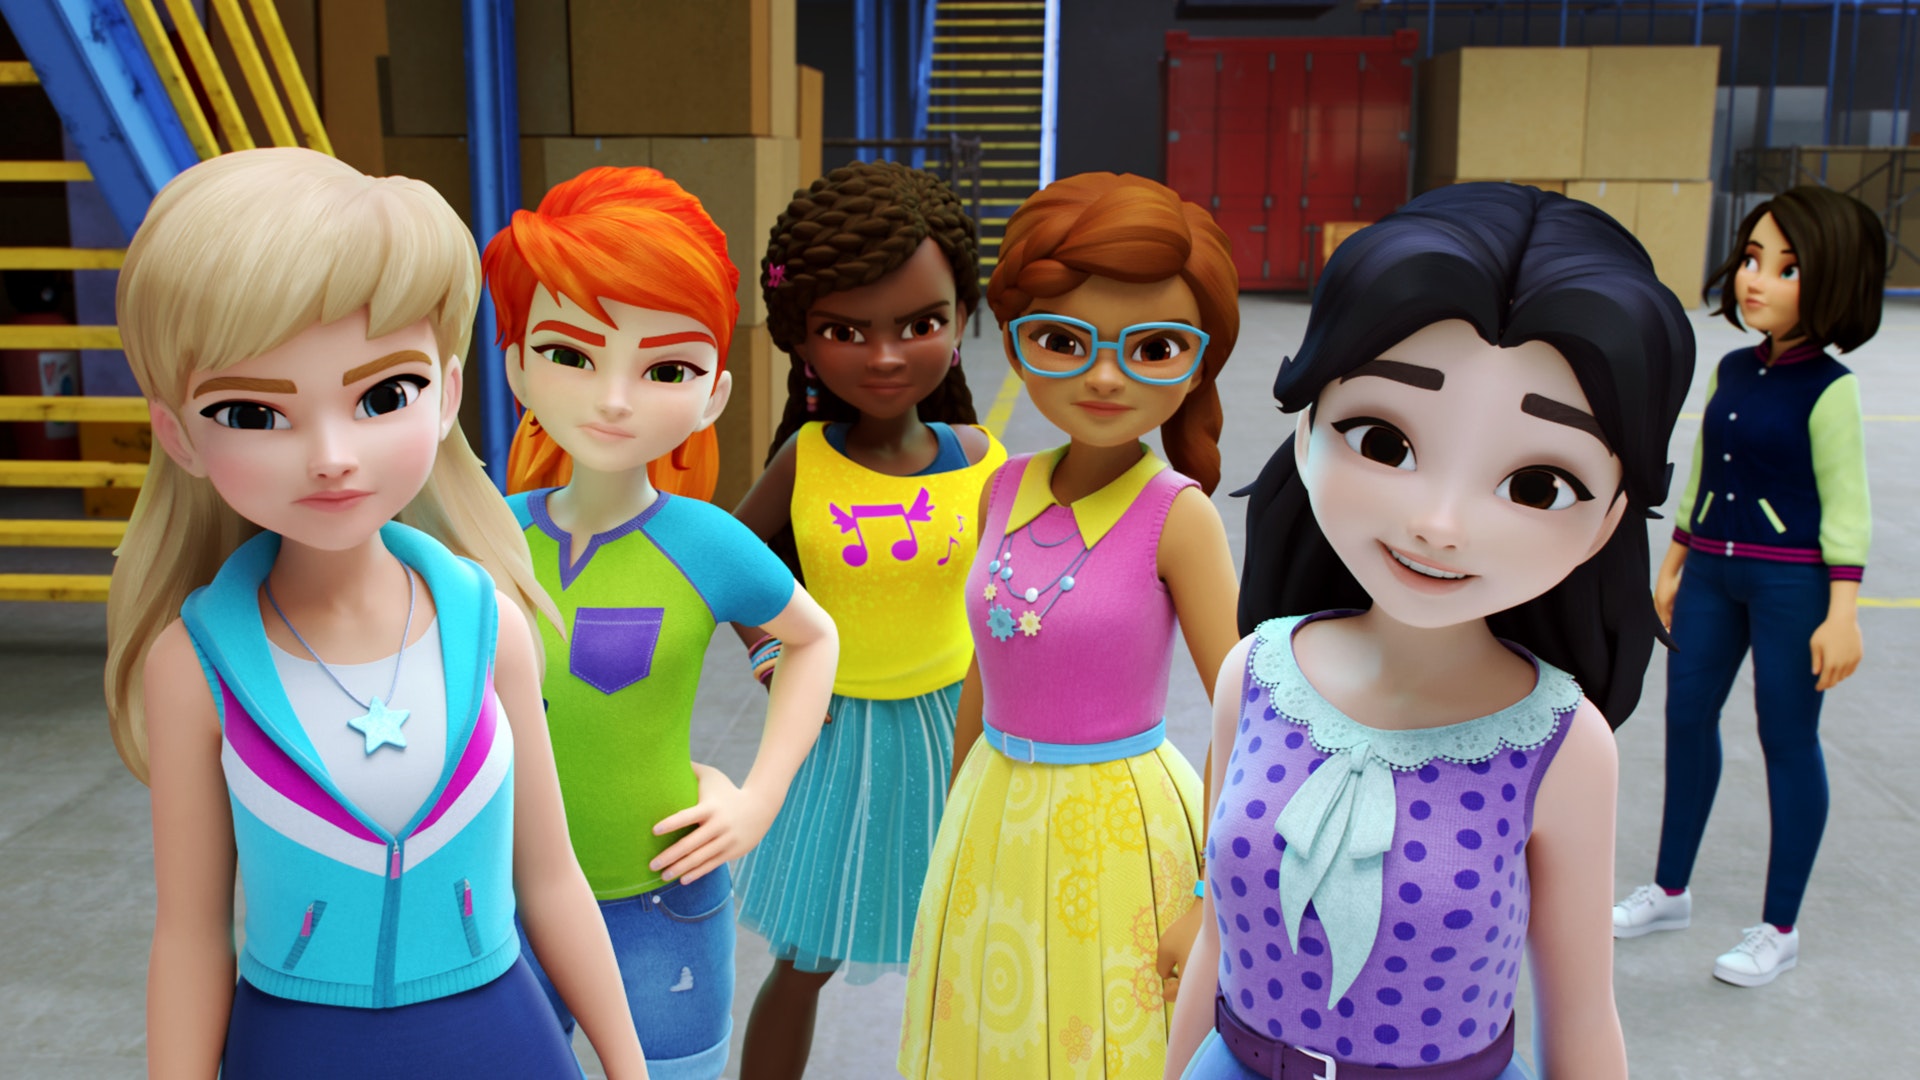 Lego Friends Girls On A The Mission - HD Wallpaper 